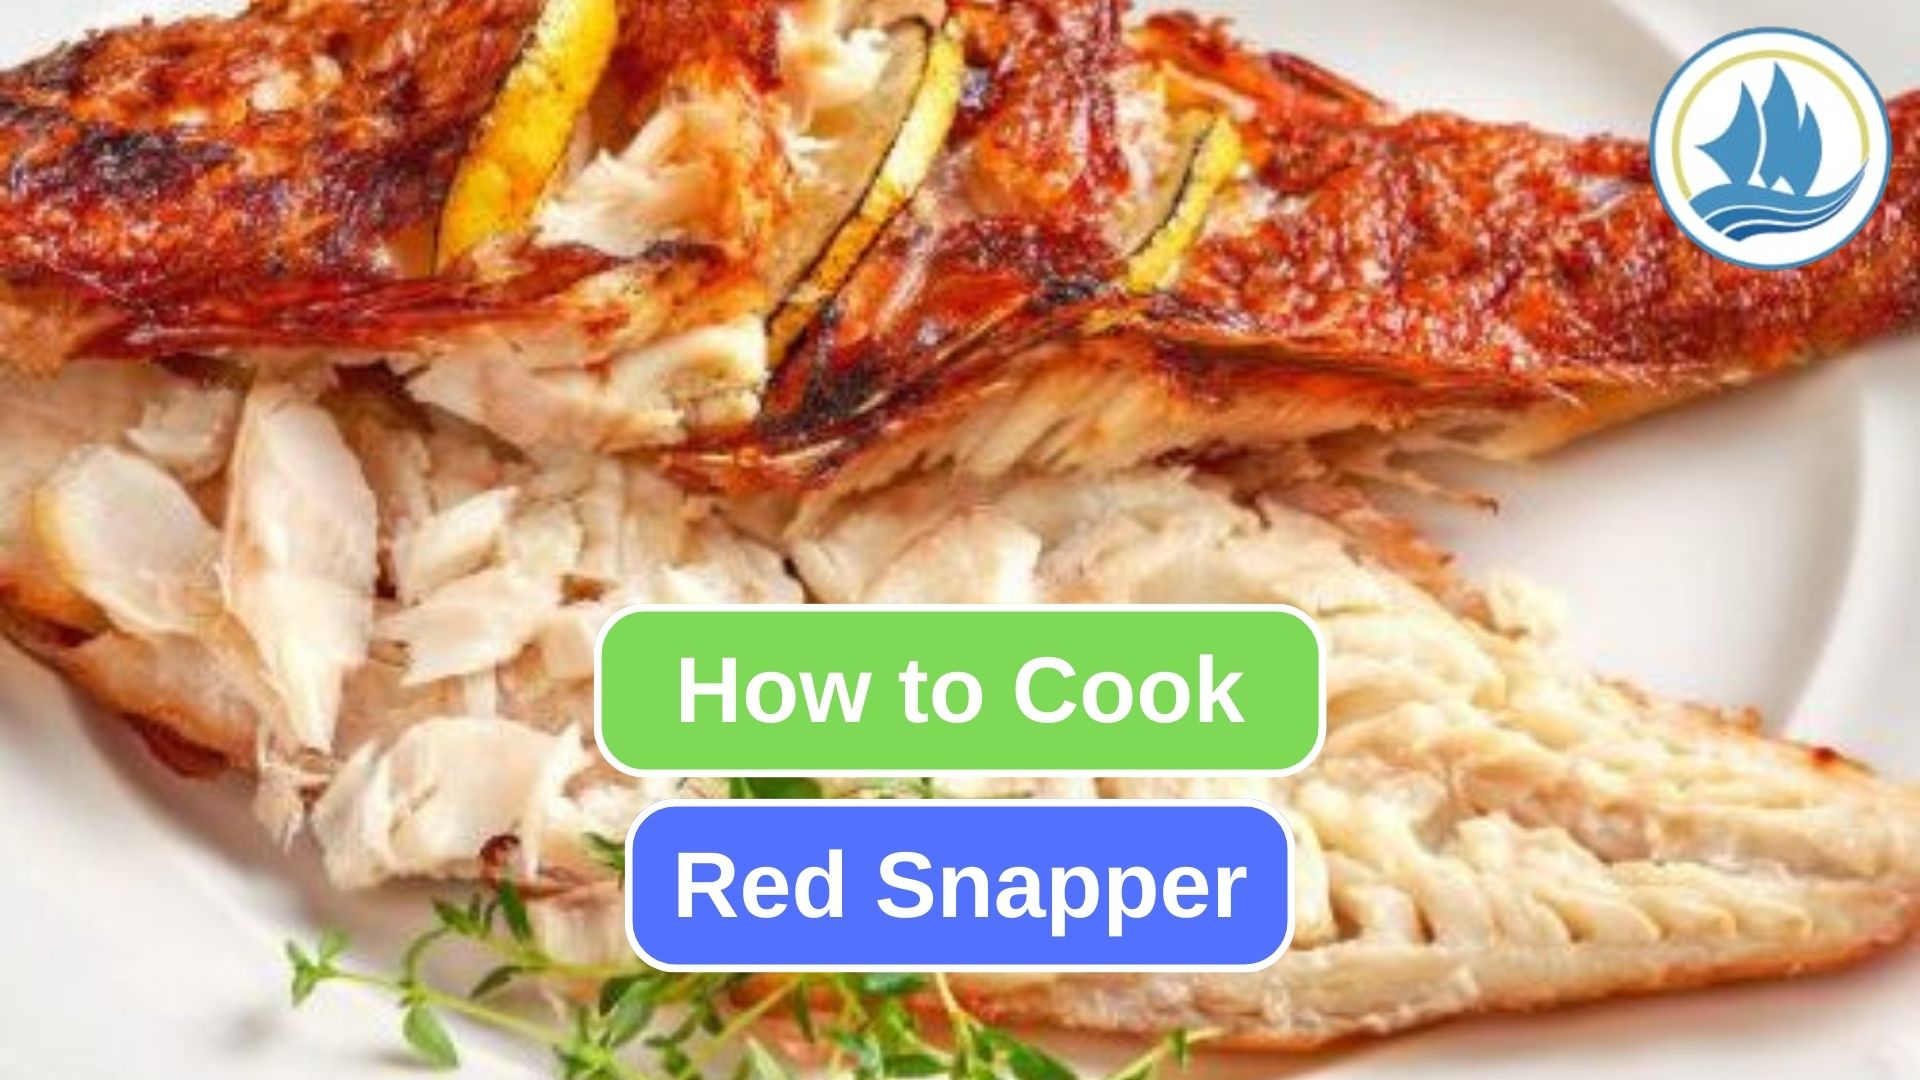 Here’s Some Way to Prepare Red Snapper